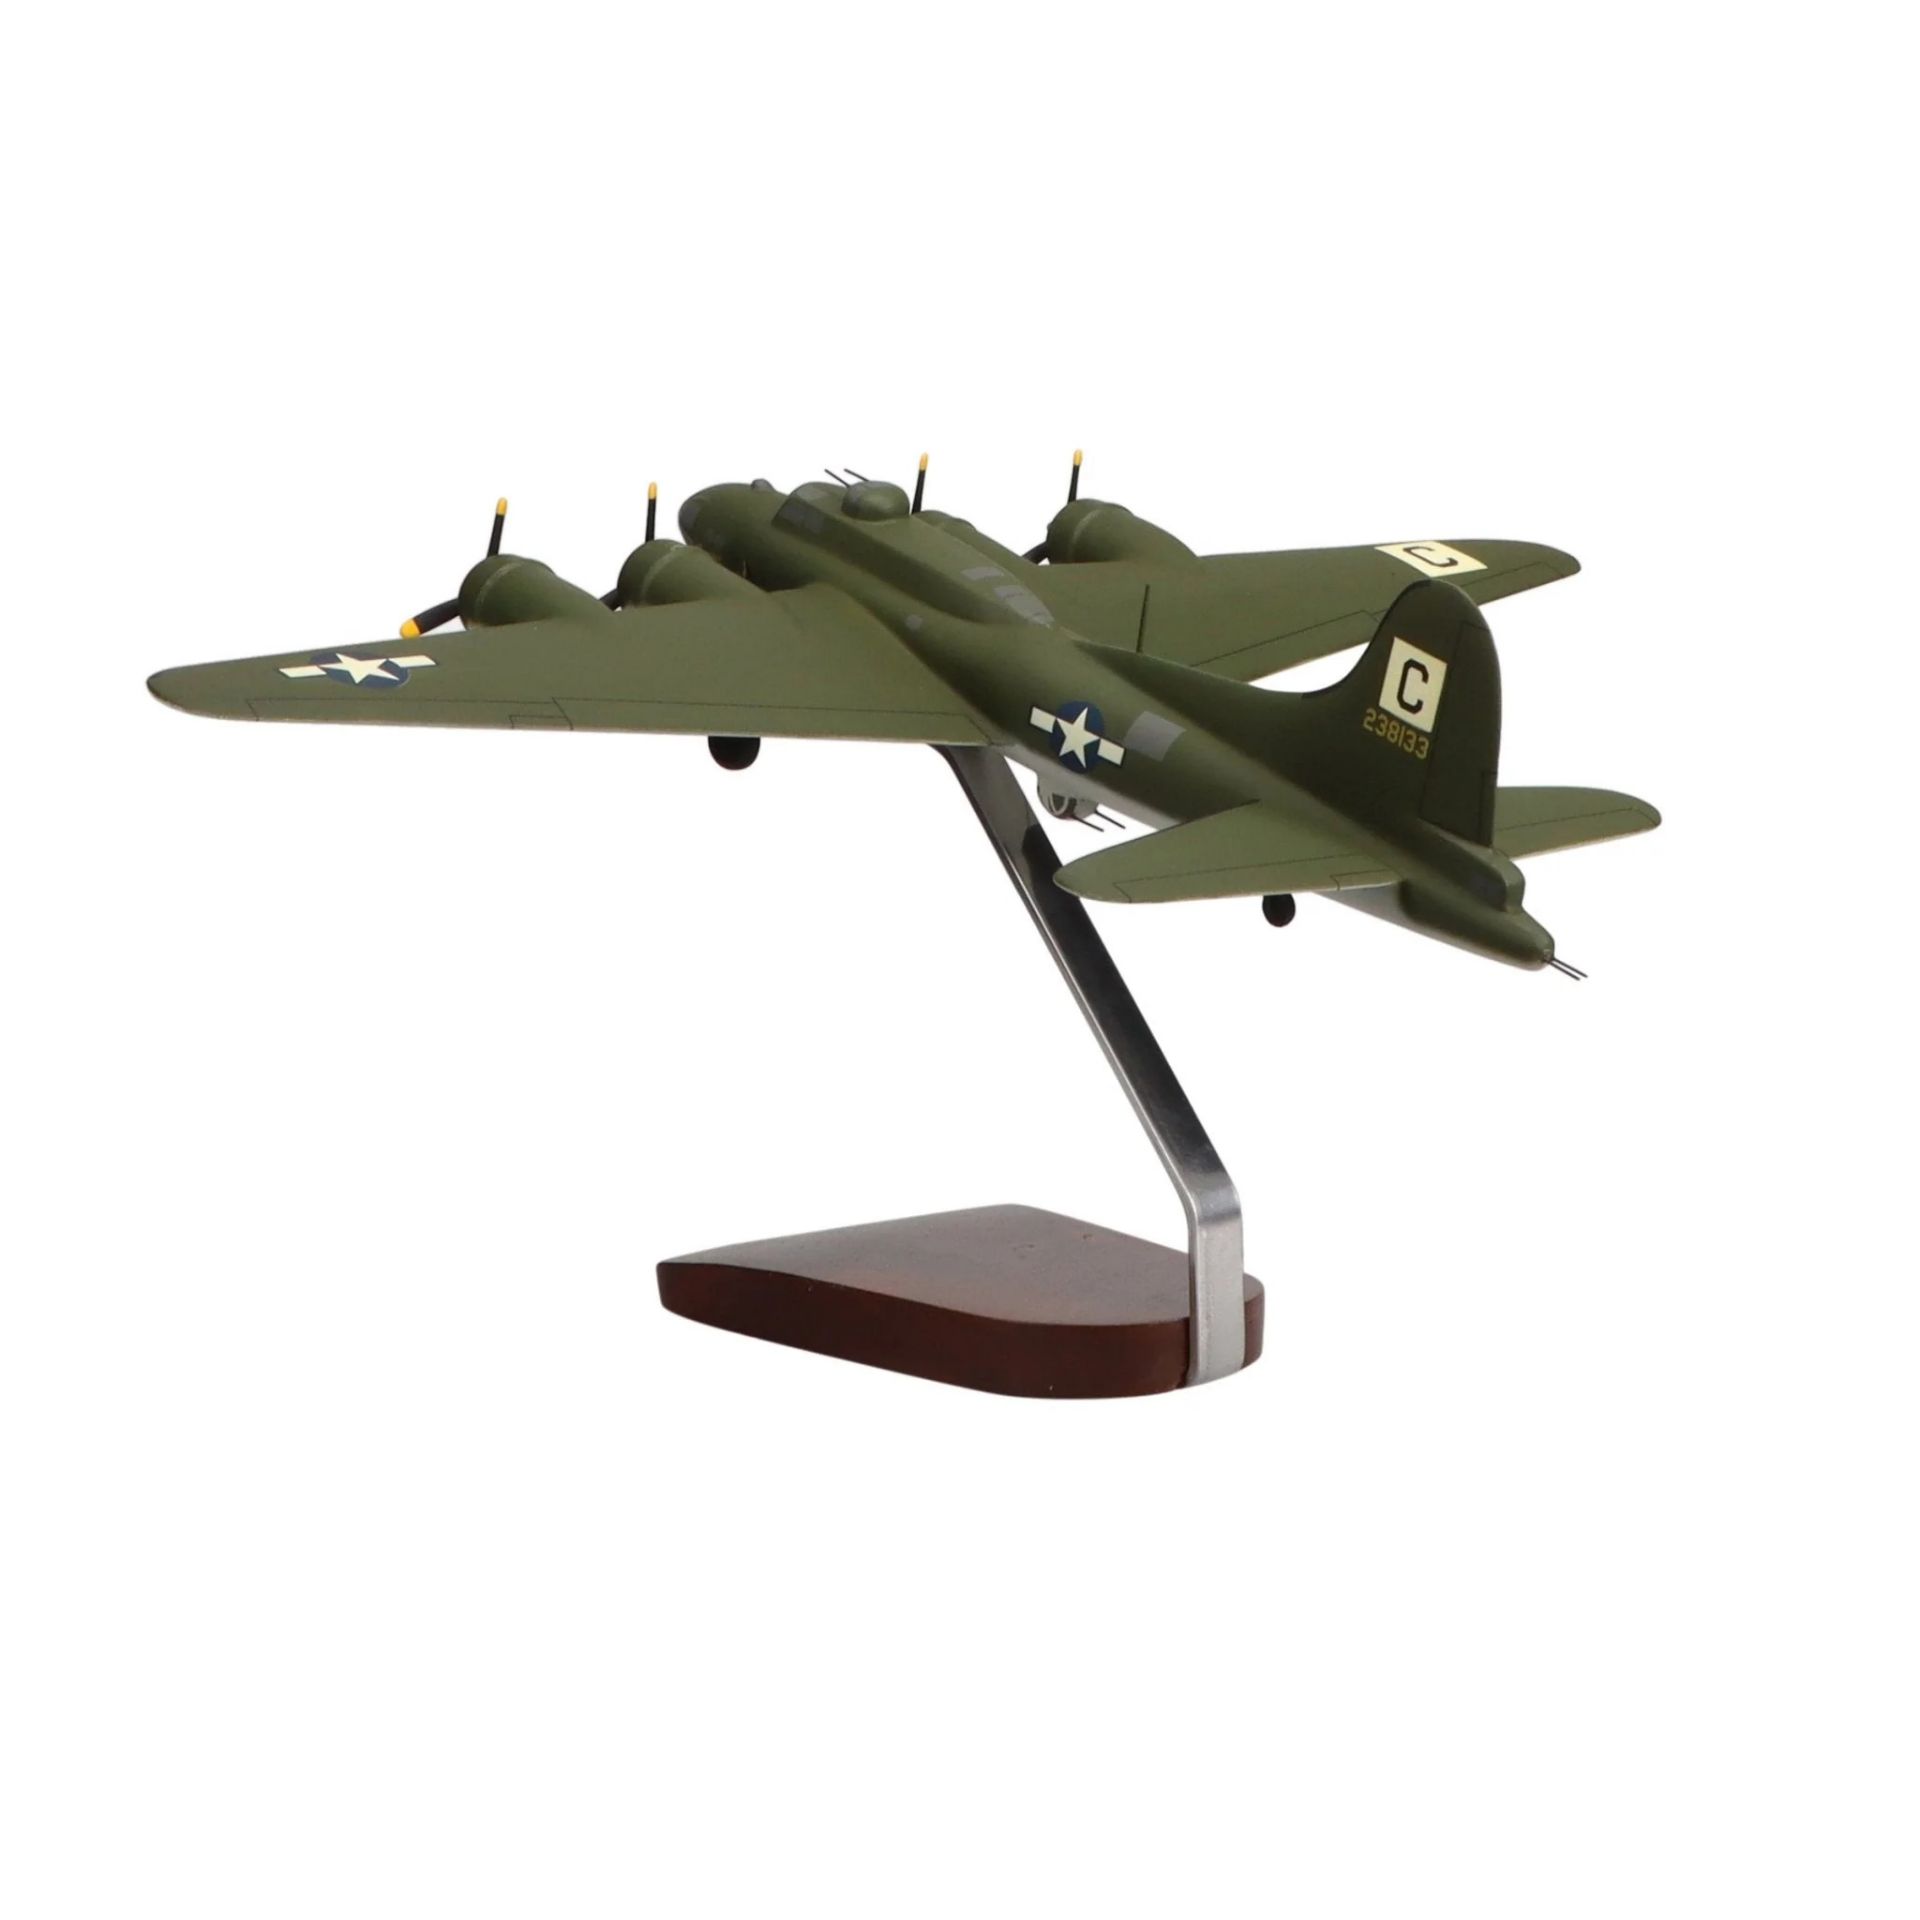 Boeing B17 Flying Fortress Scale Model - Image 3 of 4